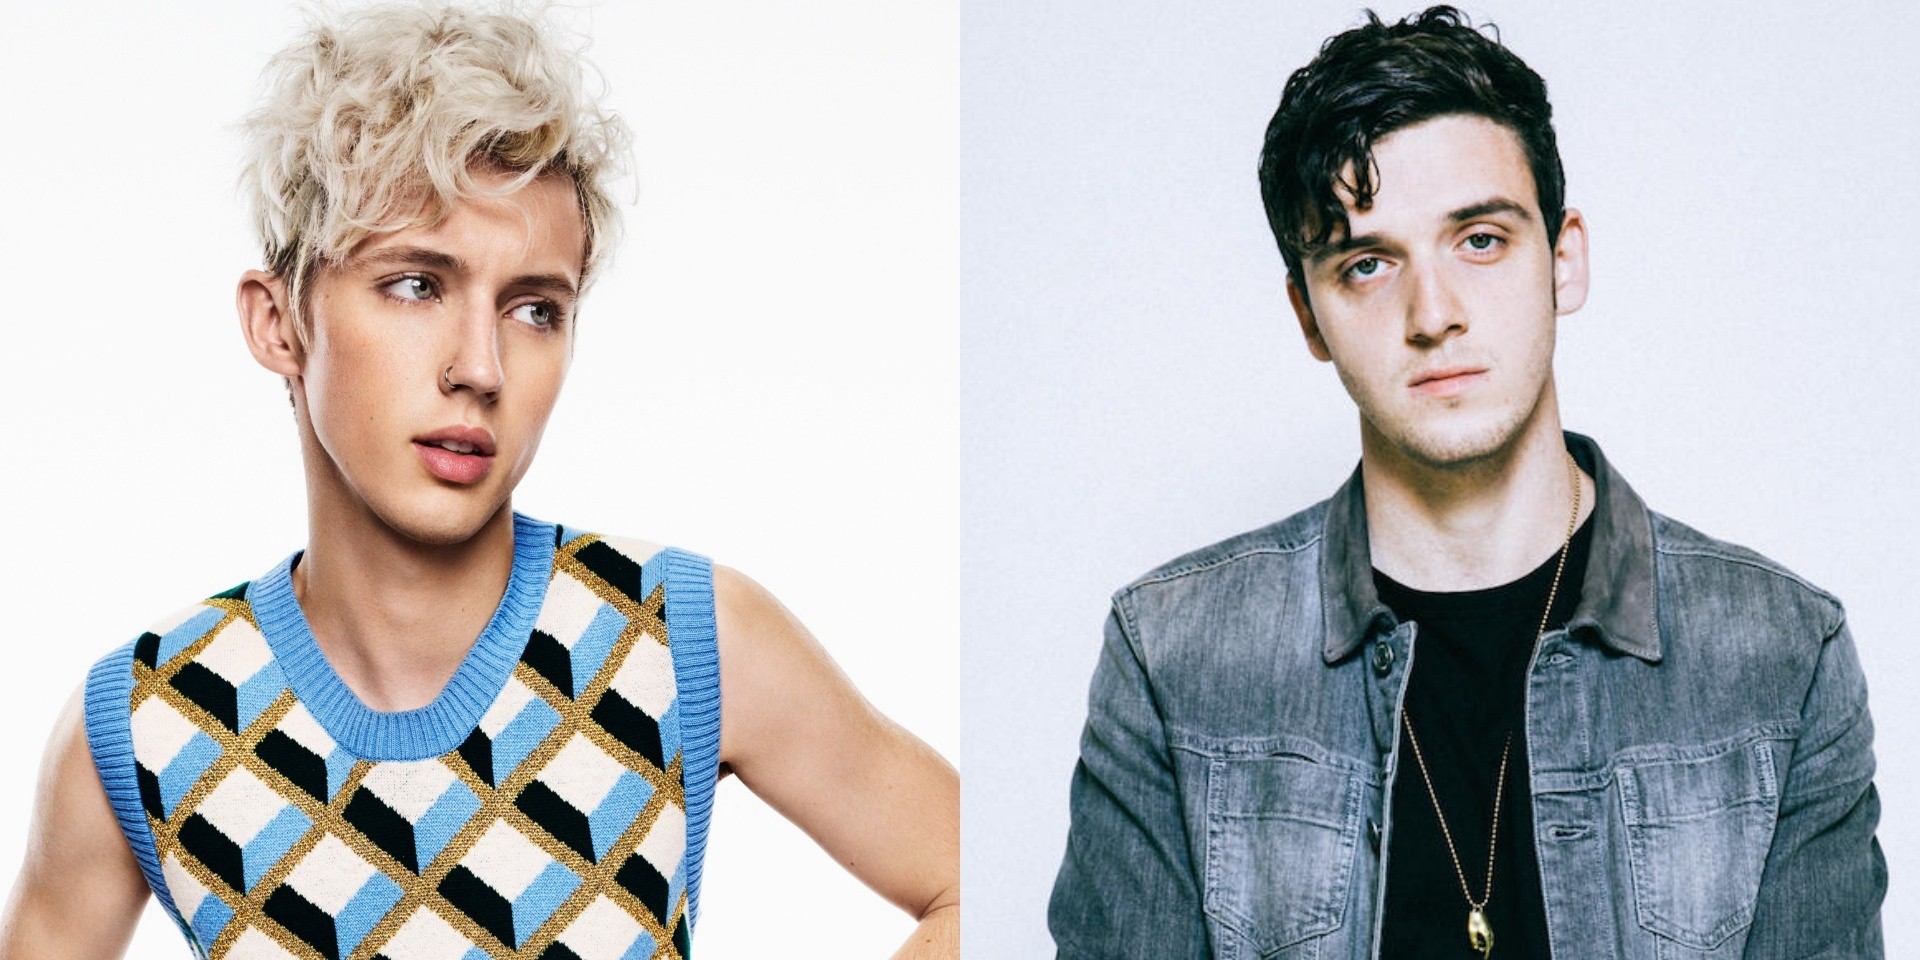 Troye Sivan and Lauv are collaborating on a new single 'I'm So Tired' out next week